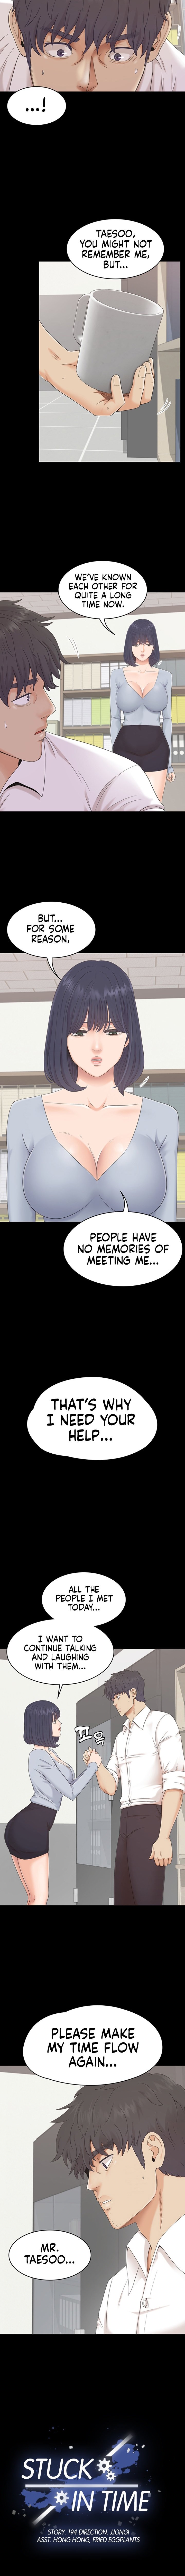 stuck-in-time-chap-2-3